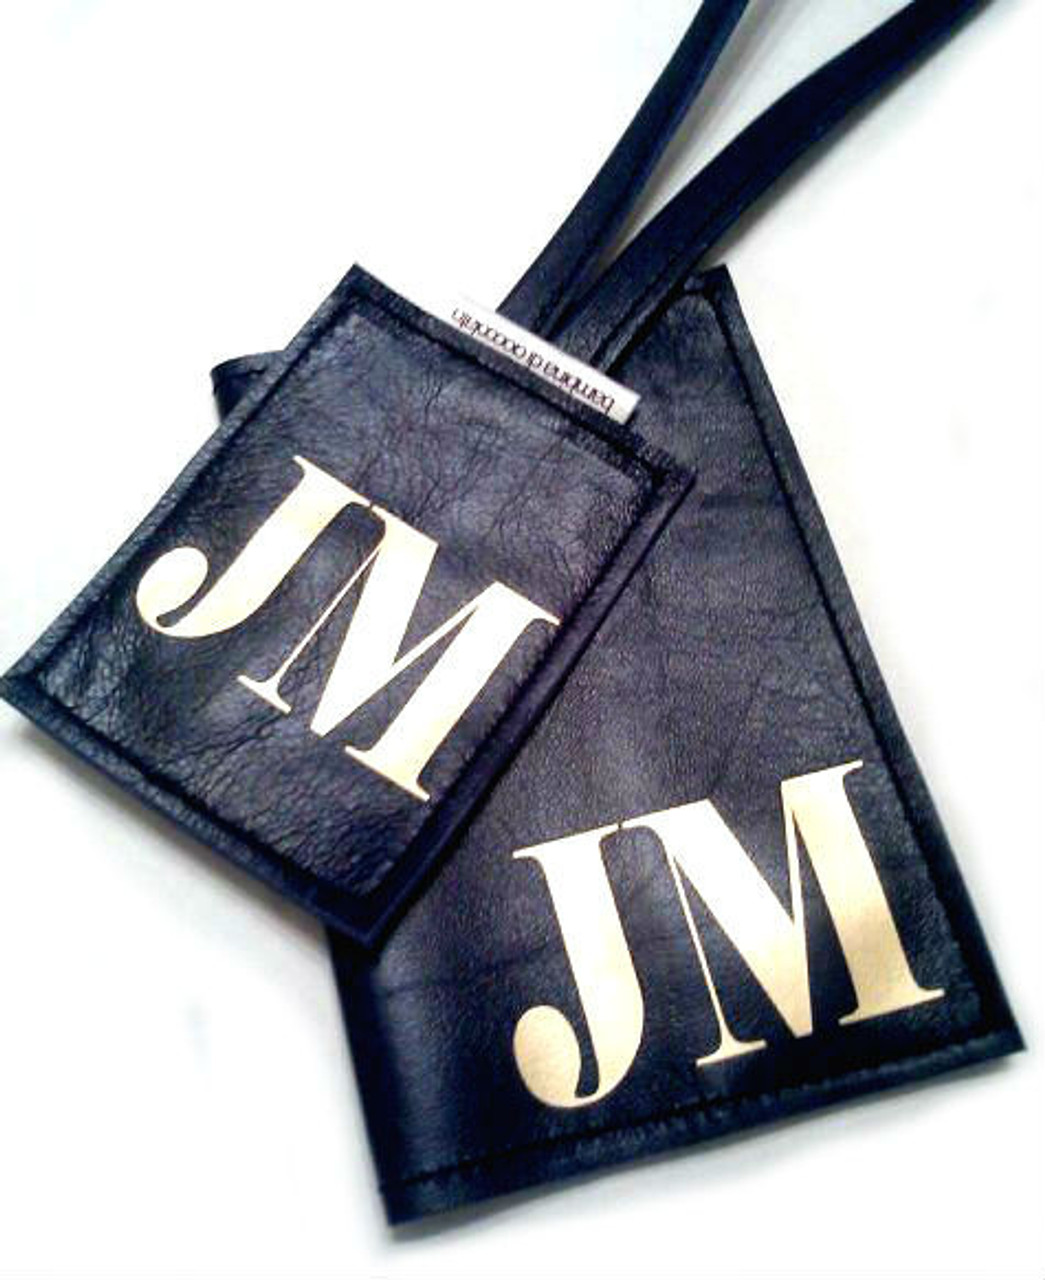 Personalized Monogrammed Leather Passport Cover Holder and Luggage Tag